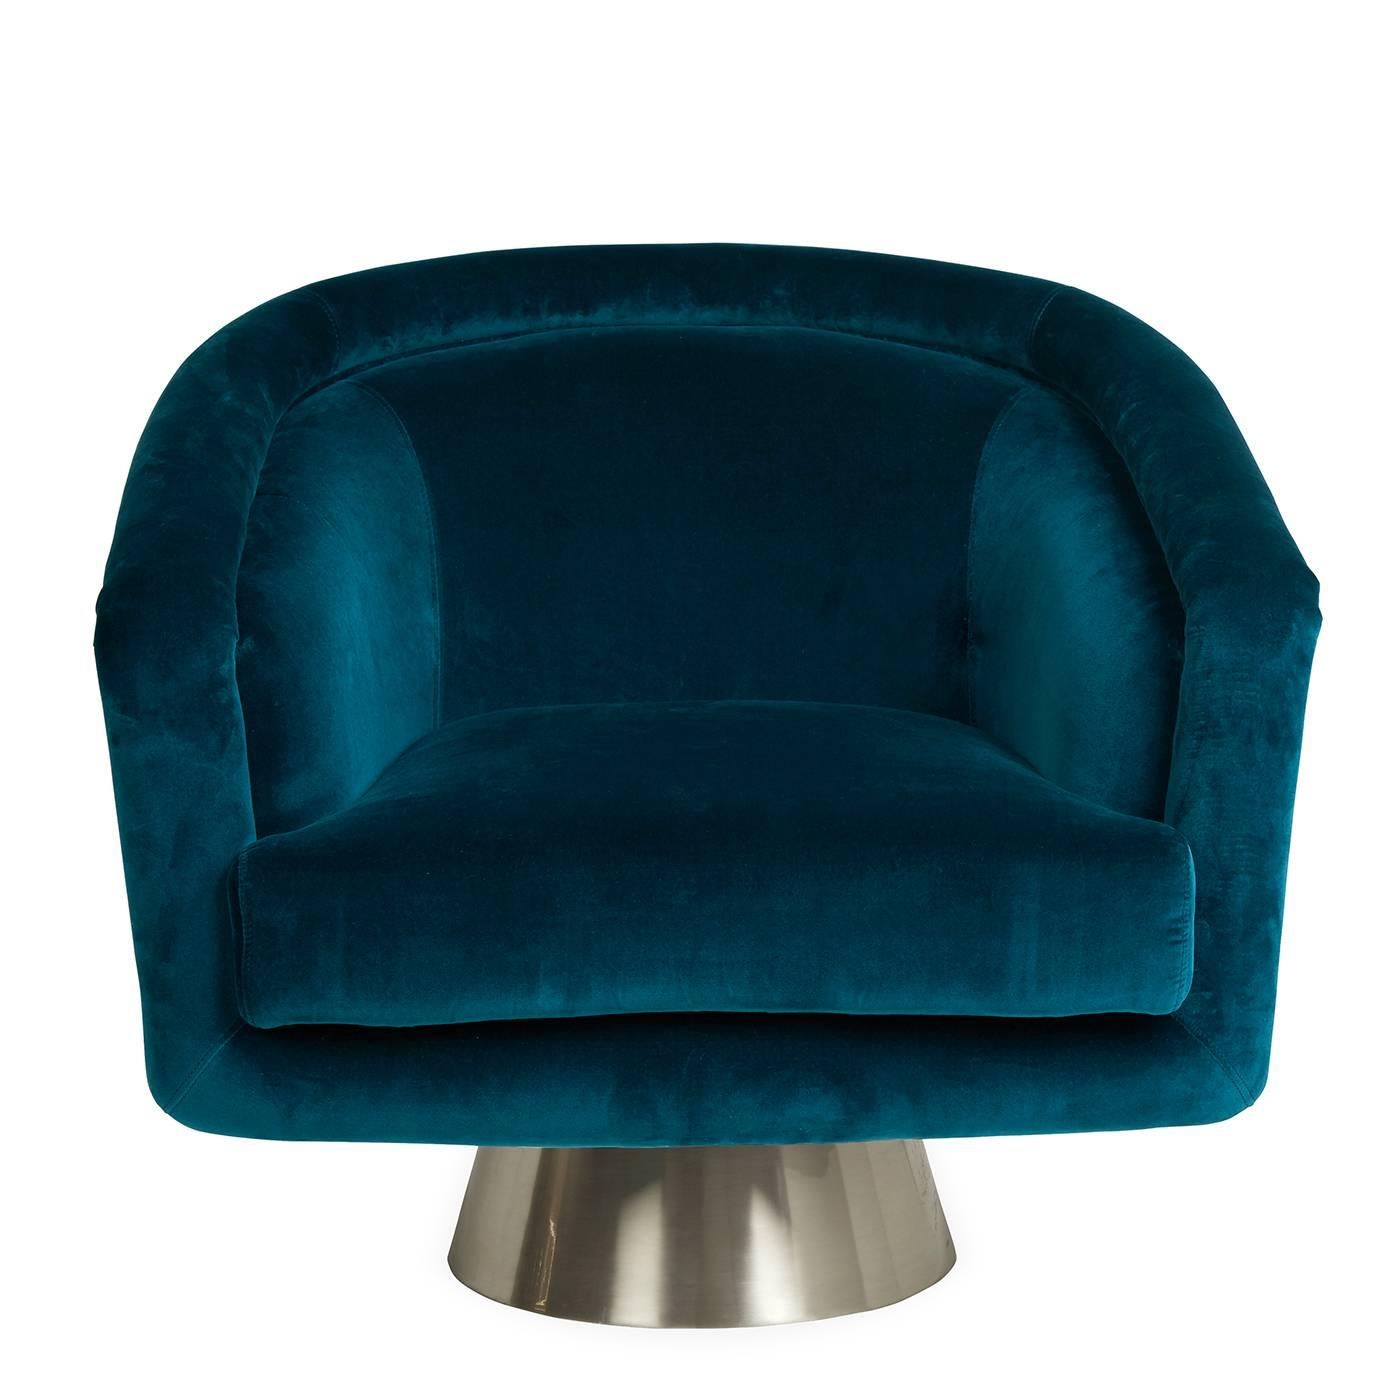 Louche glamour. Think Halston, think Studio 54, think sybaritic style. But also think cozy, comfy swivel chair. Upholstered in inky blue Rialto Reef velvet with an architectural brushed stainless steel swivel base.

Specs:
Seat depth: 20.5 in.
Lido